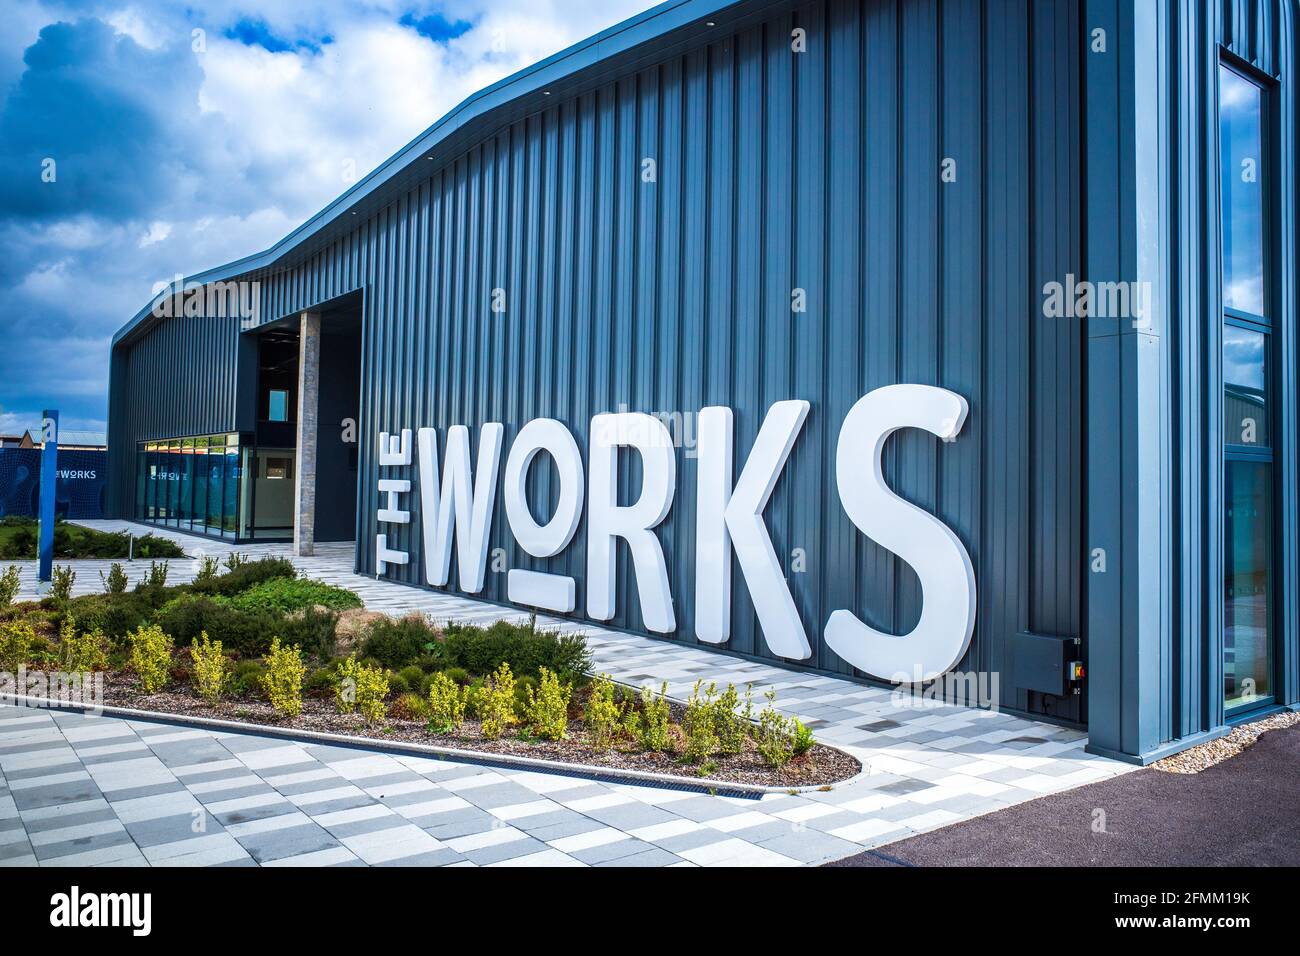 The Works Unity Campus Sawston Cambridge. The Works, a flexible office & R&D environment Cambridge life science & technology cluster. Architects NBBJ. Stock Photo